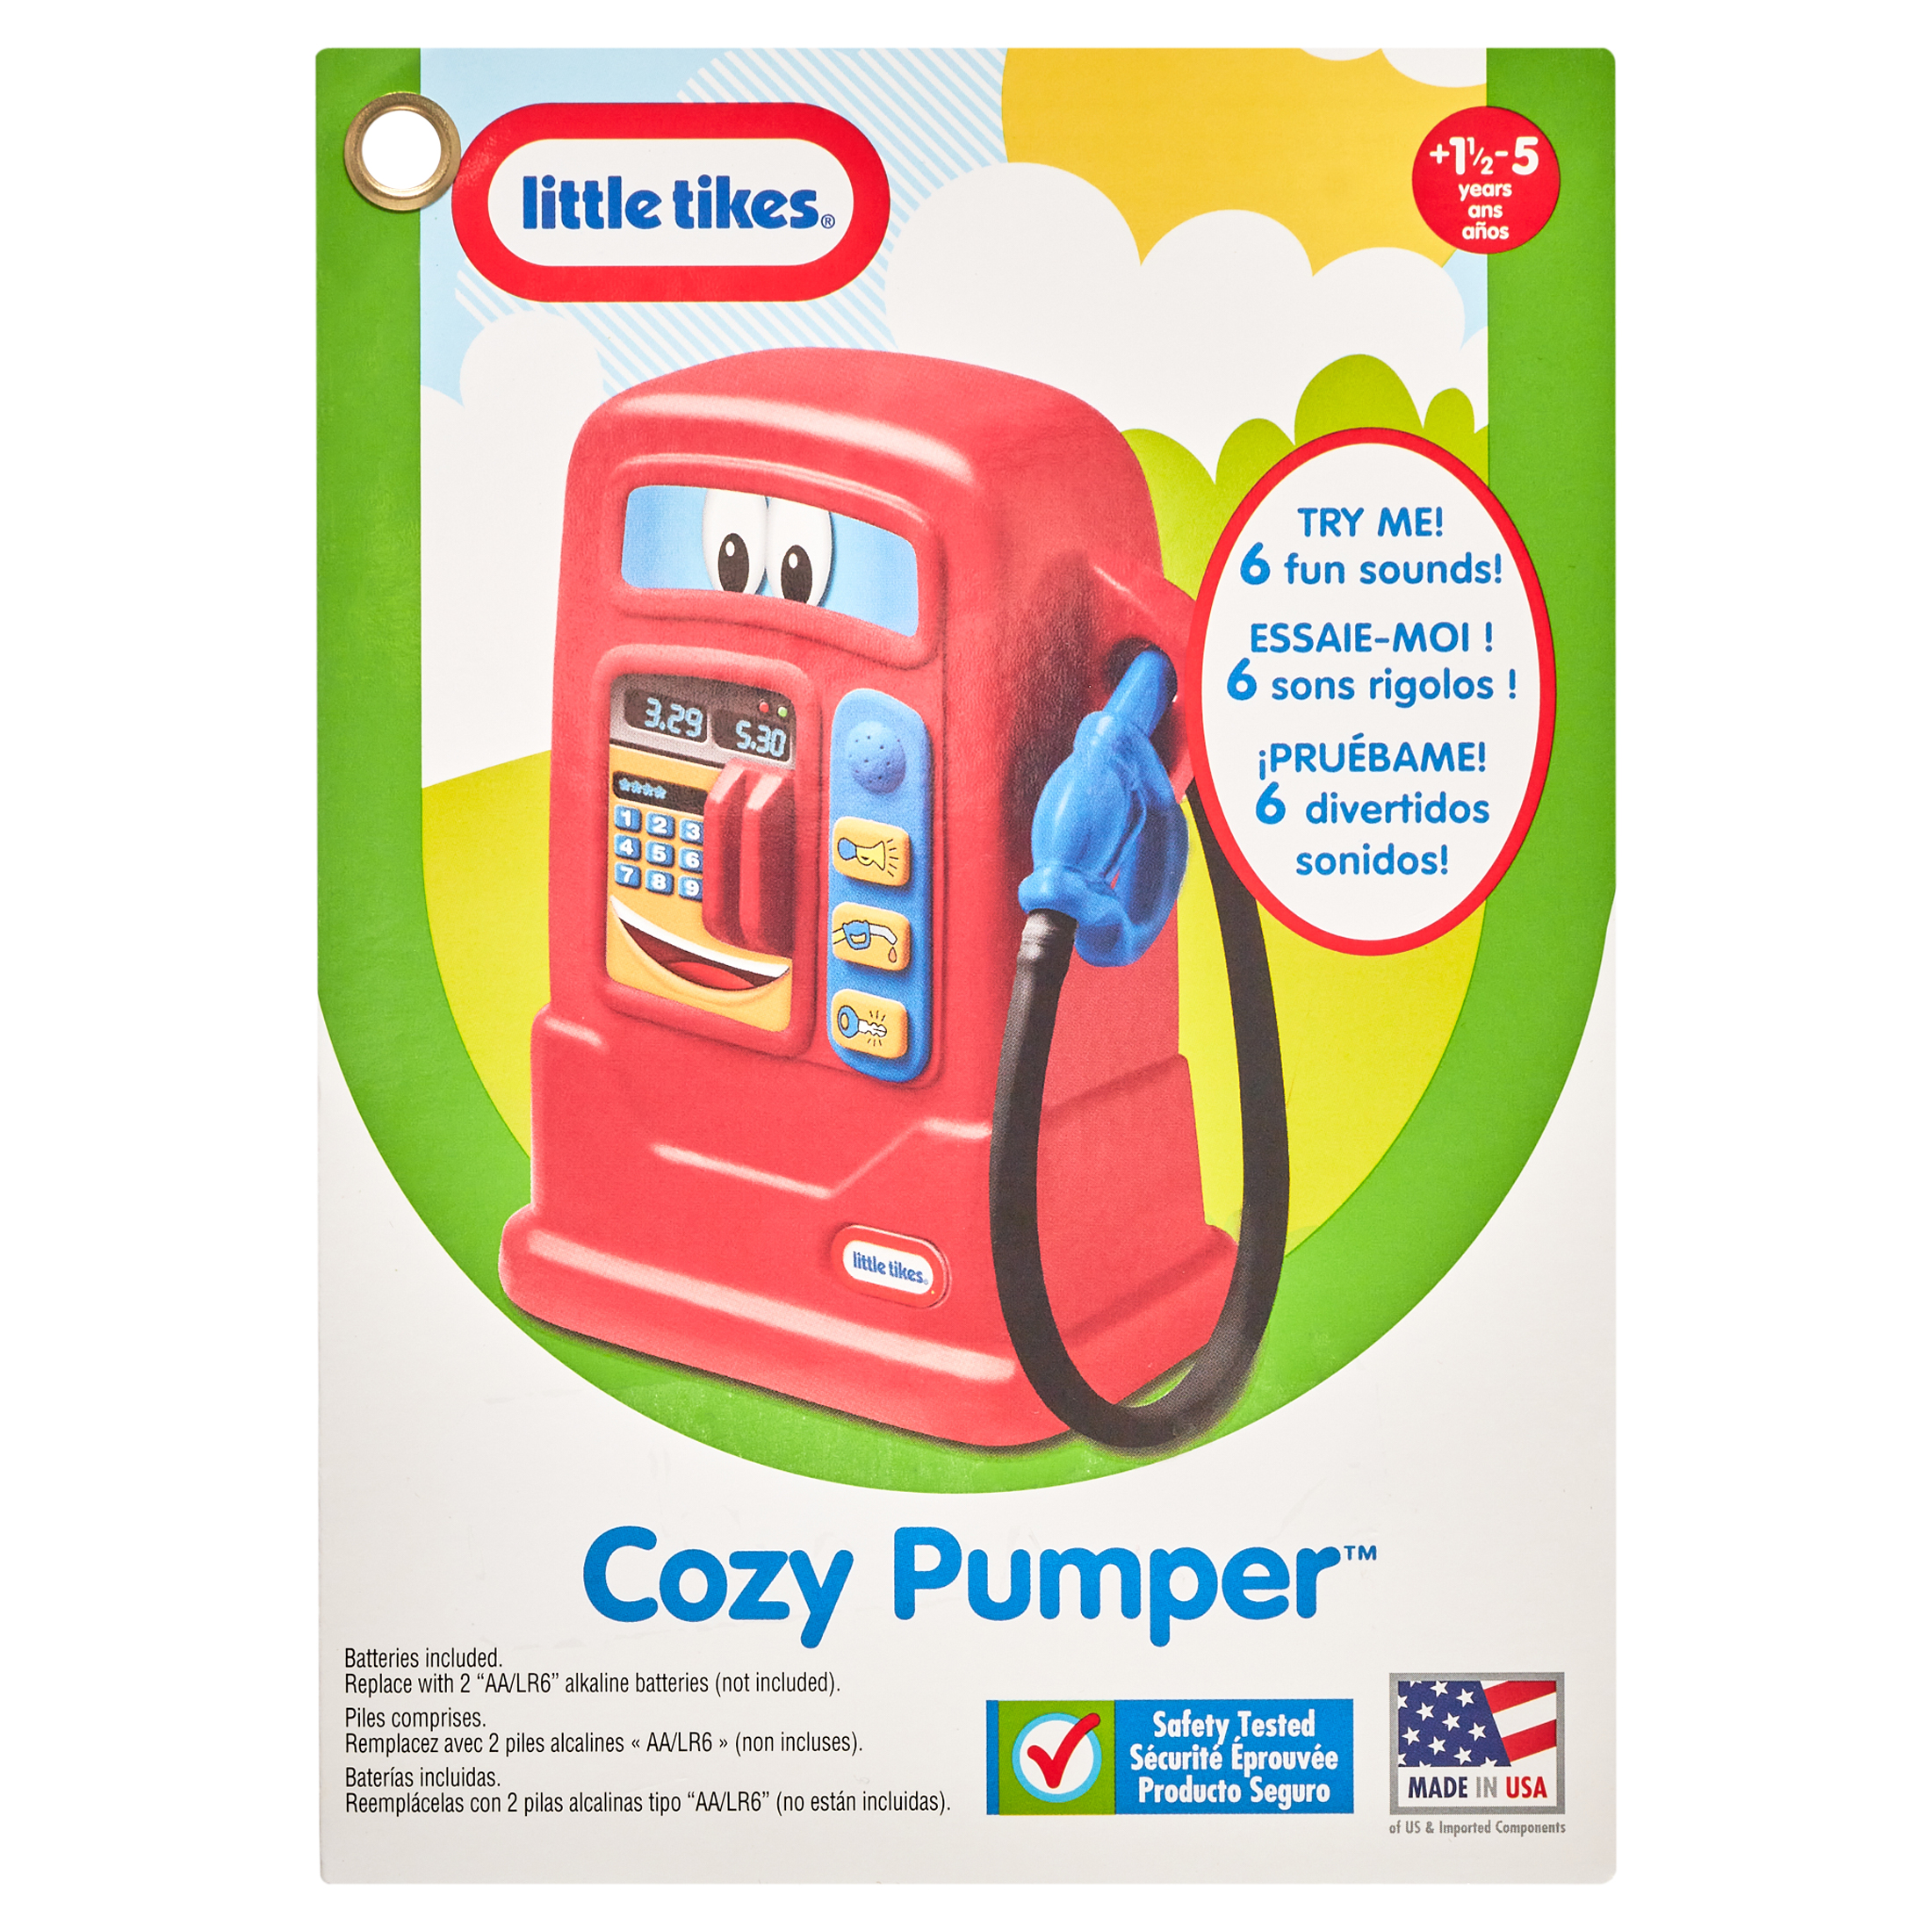 Little Tikes Cozy Pumper in Red, Pretend Play Toy with Interactive Sounds, Use w/ Cozy Coupe Ride-on Cars, Kids Boys Girls Ages 2-5 Years - image 5 of 8